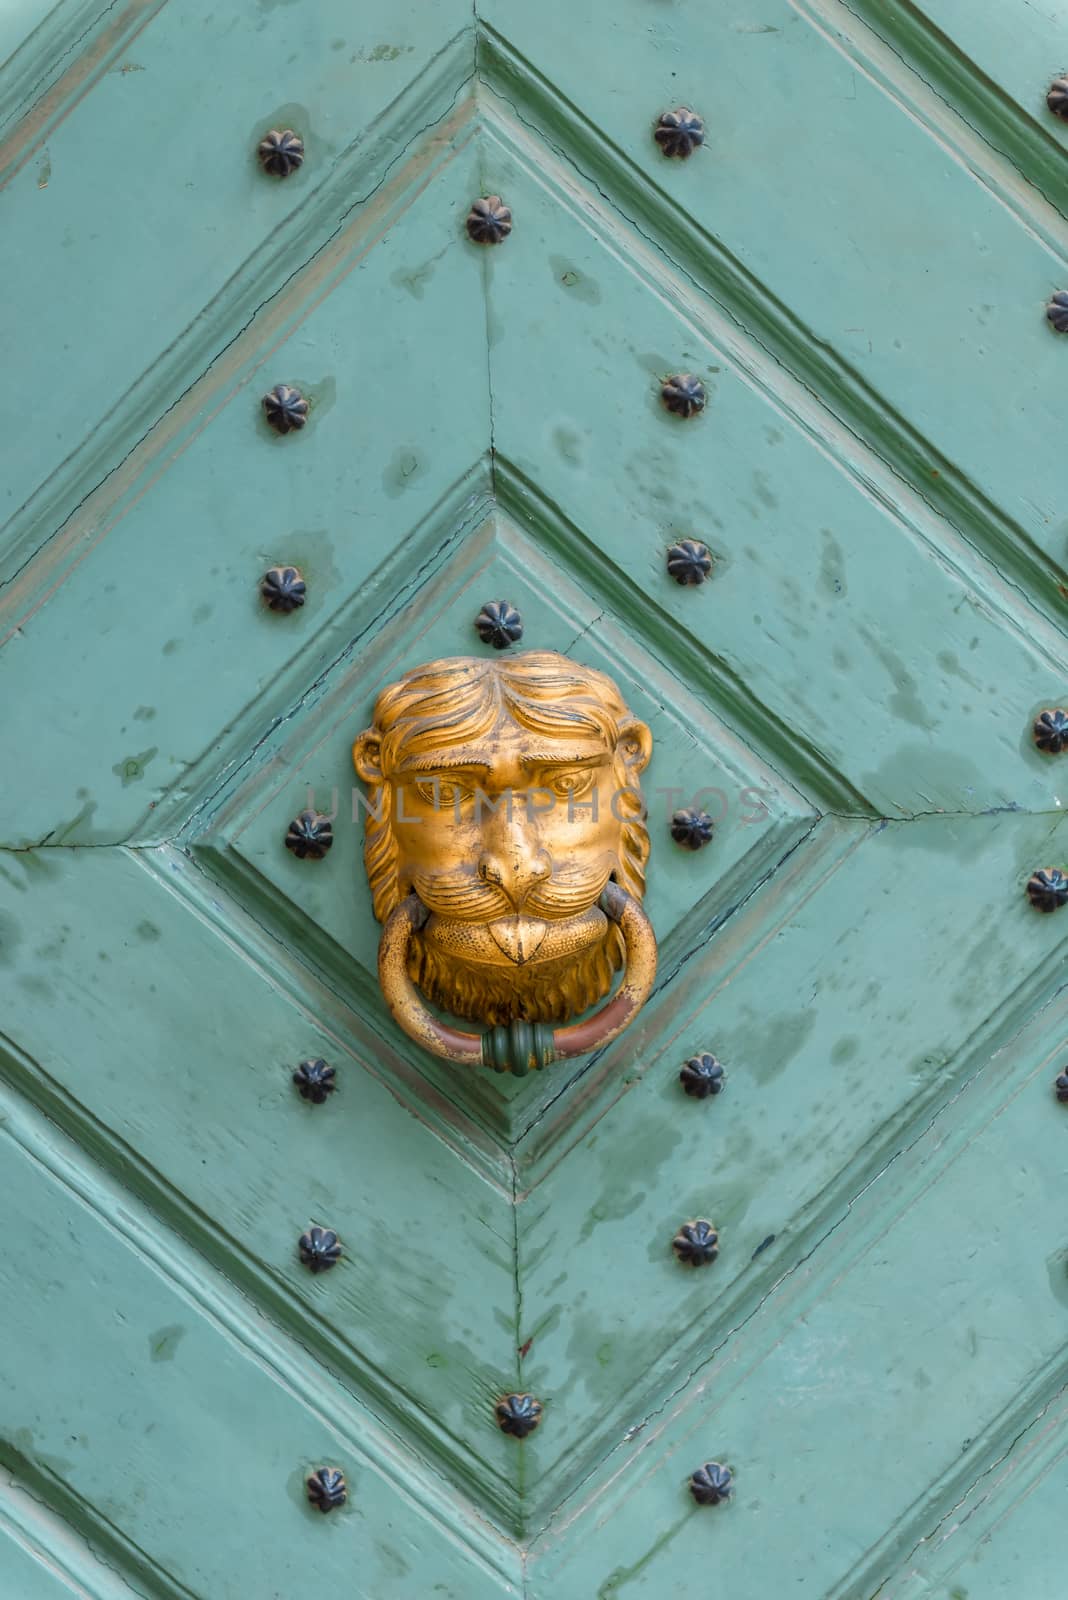 old wooden door with a brass handle in the shape of a lion's head close-up